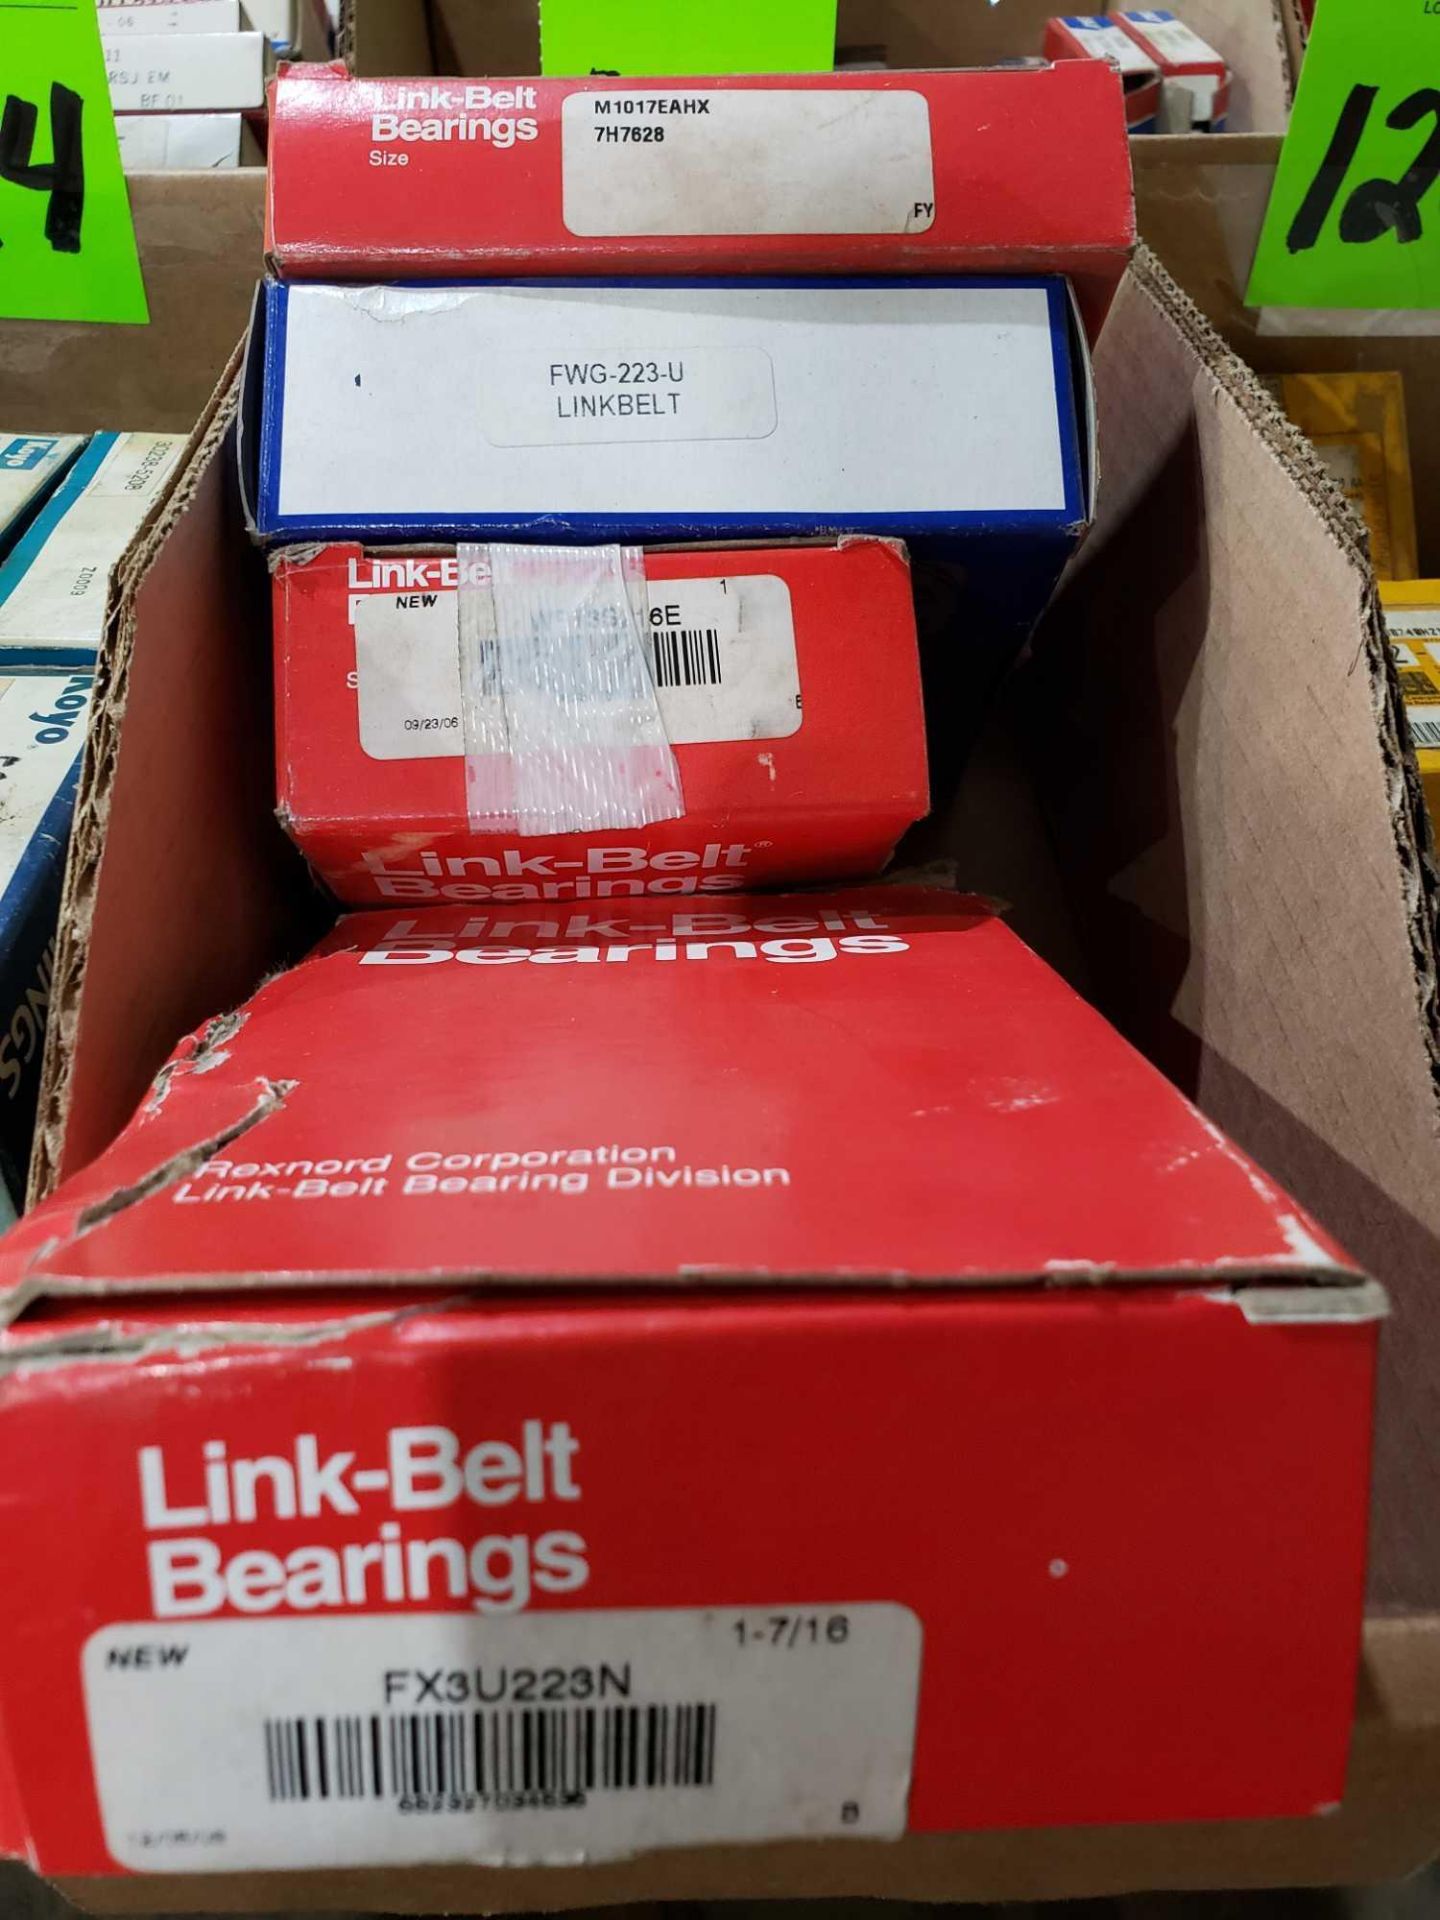 Qty 4- Link-Belt bearings, assorted part numbers. New in boxes as pictured. - Image 2 of 2